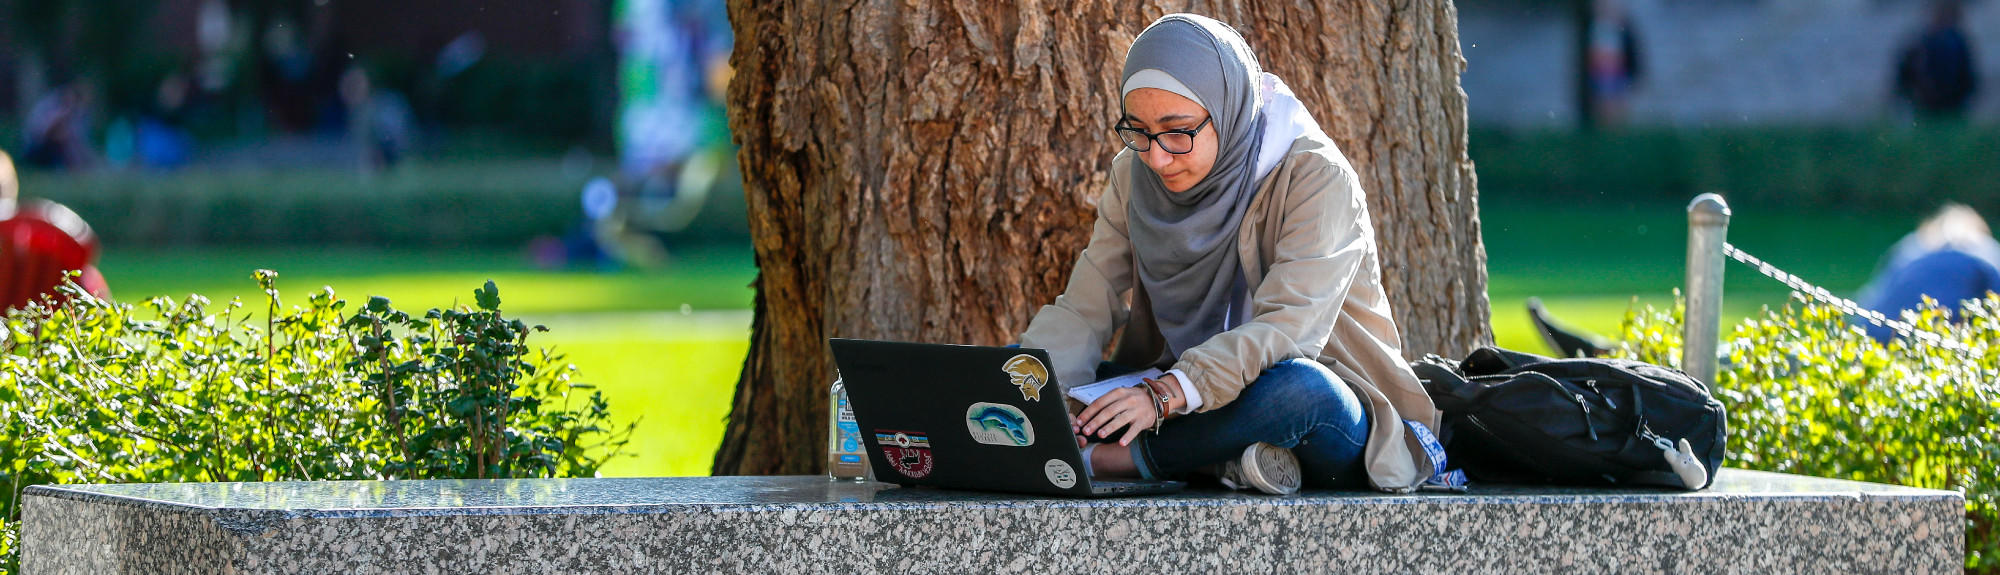 A students sits on a bench shaded by a tree and works on her laptop